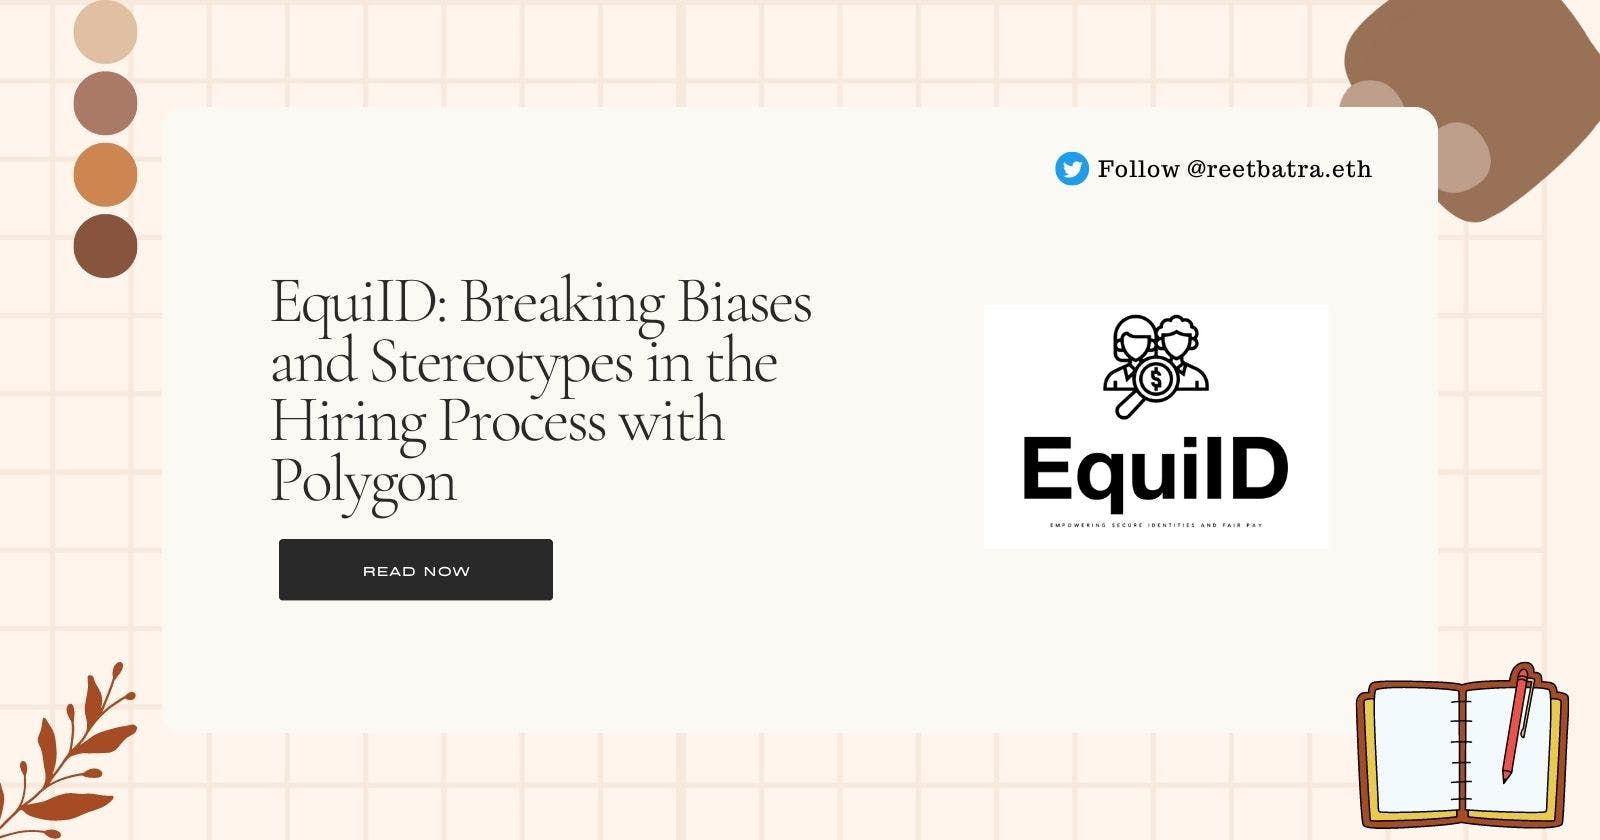 EquiID: Breaking Biases and Stereotypes in the Hiring Process with Polygon